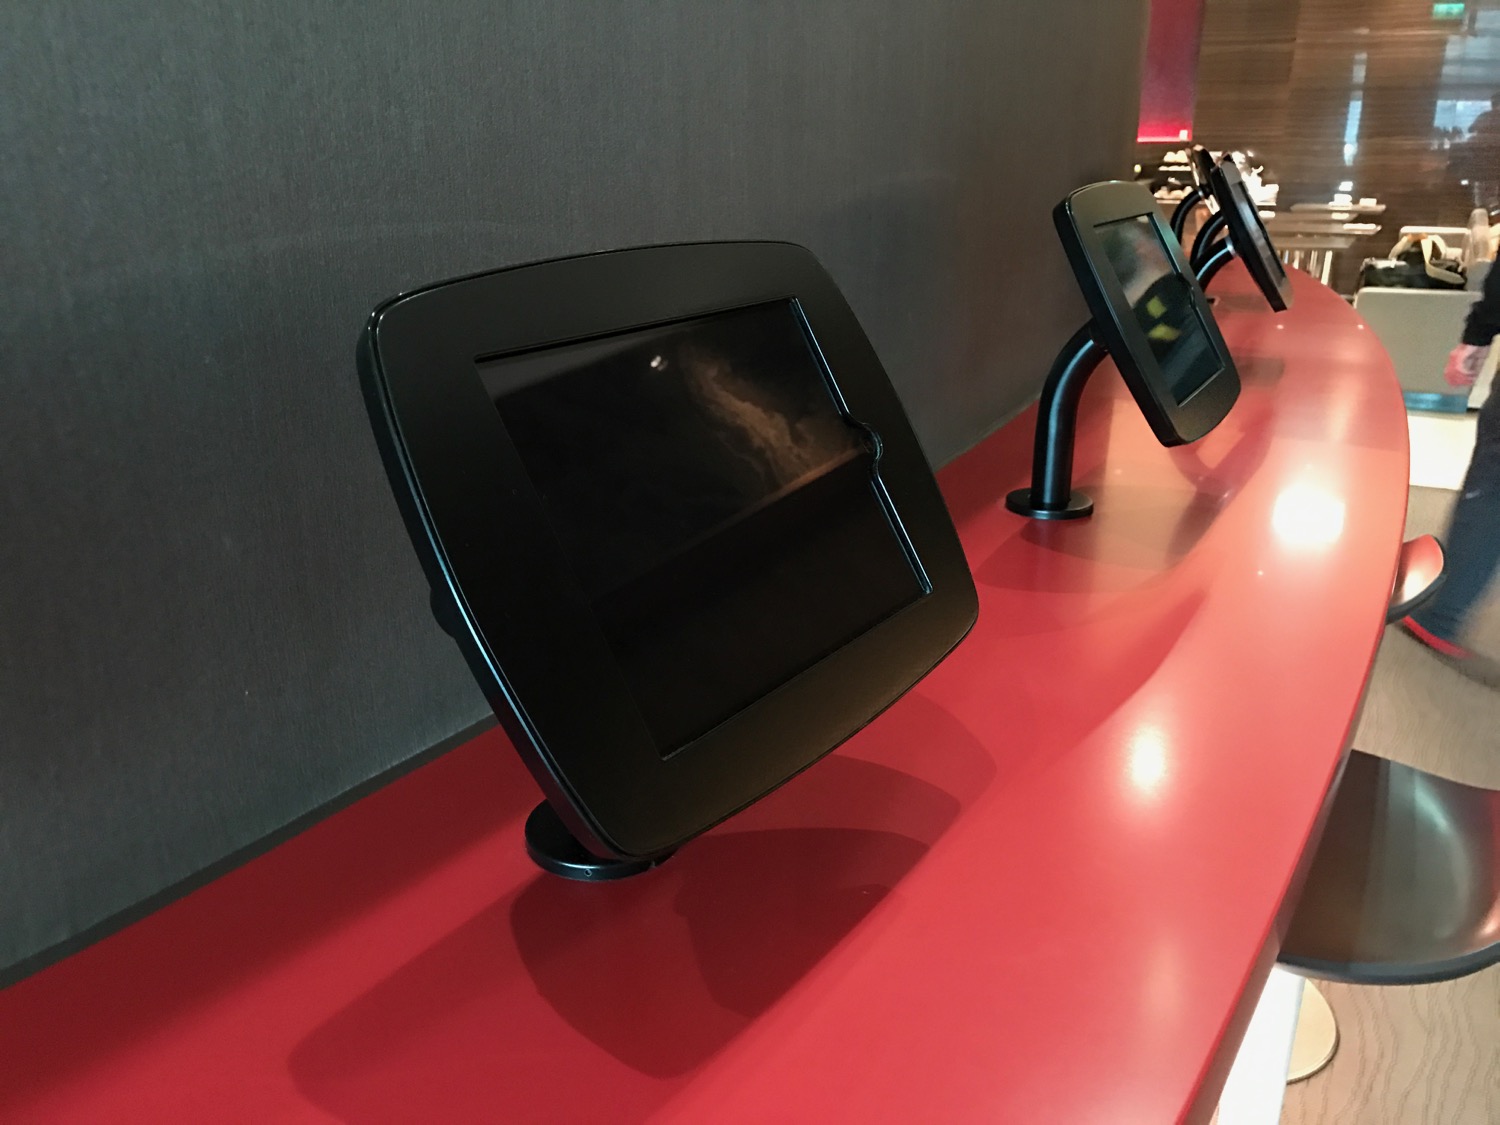 a row of black electronic devices on a red surface